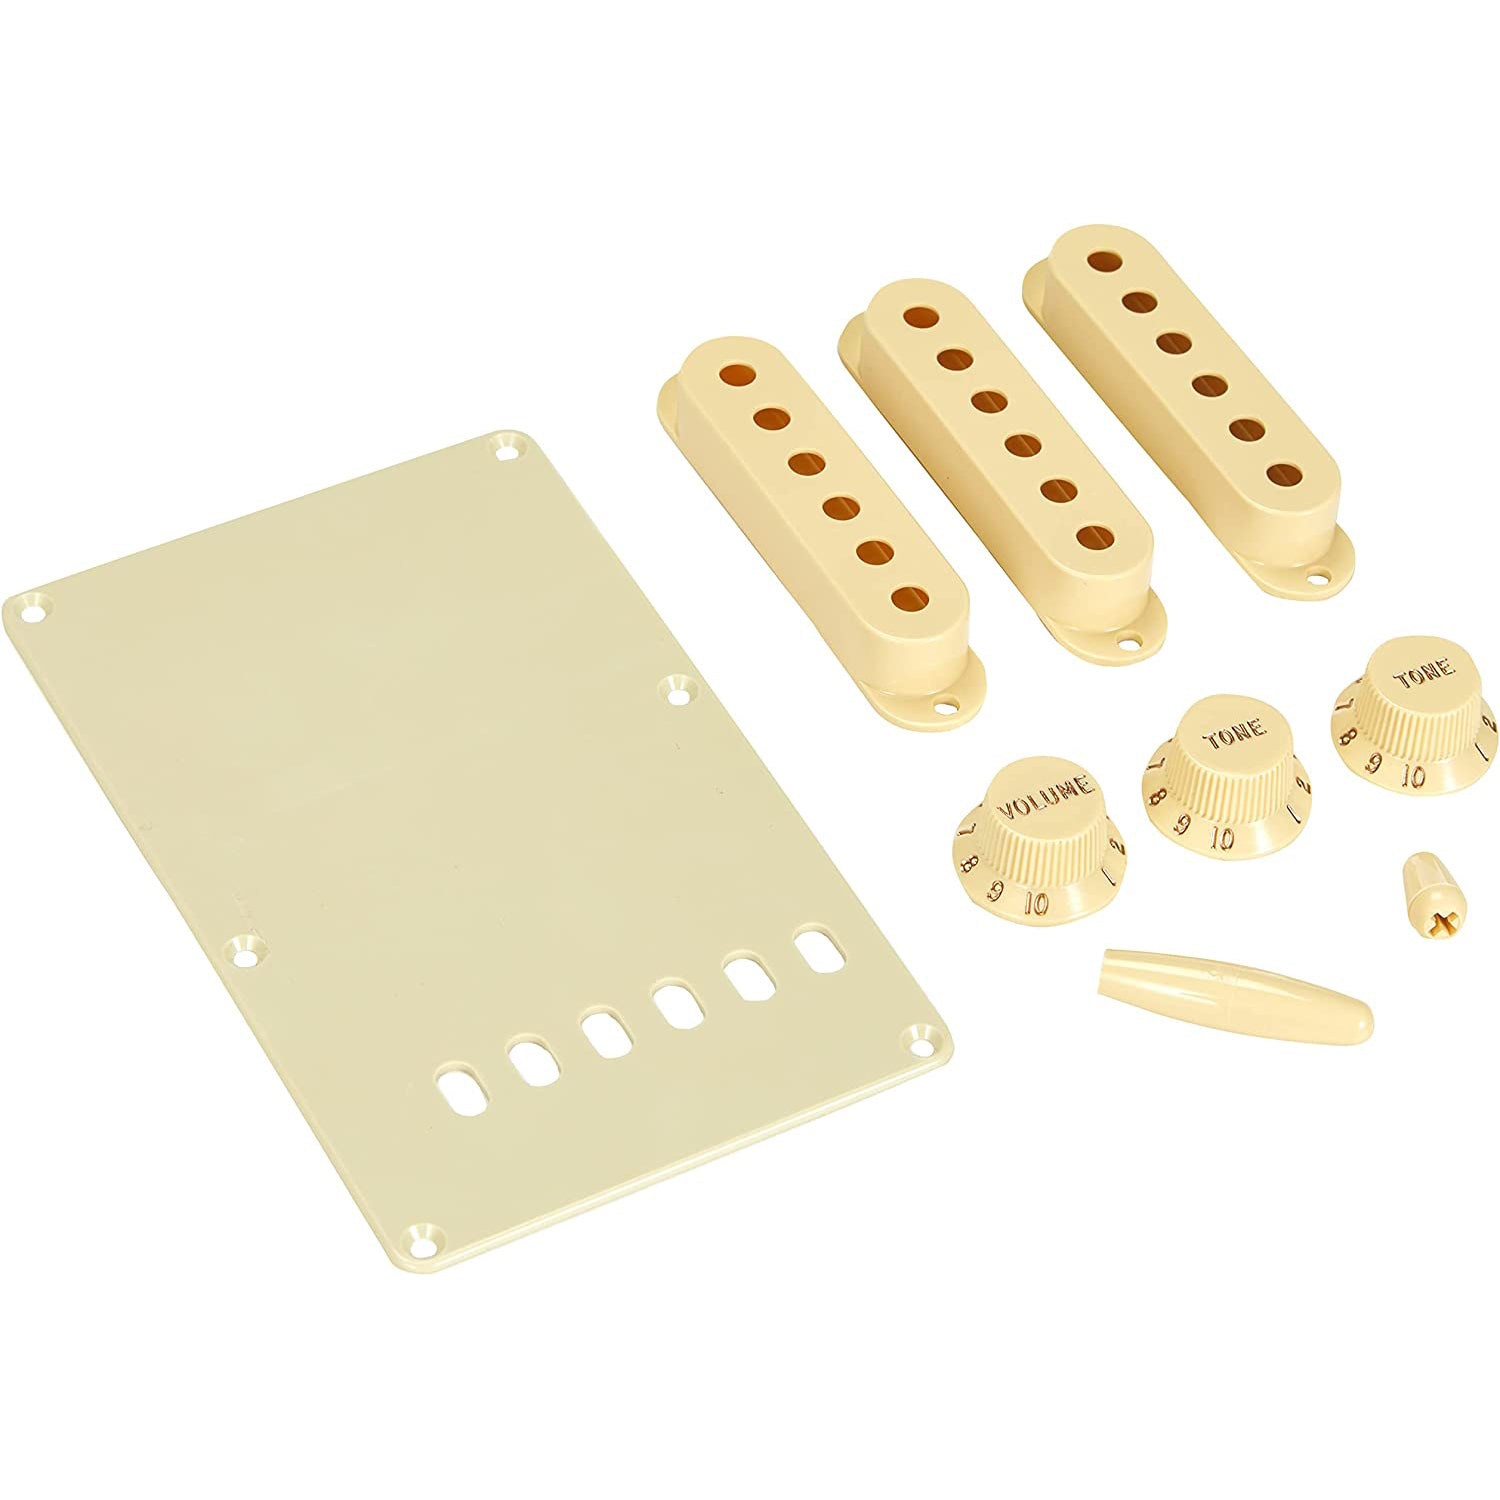 Aged Stratocaster Accessory Kit